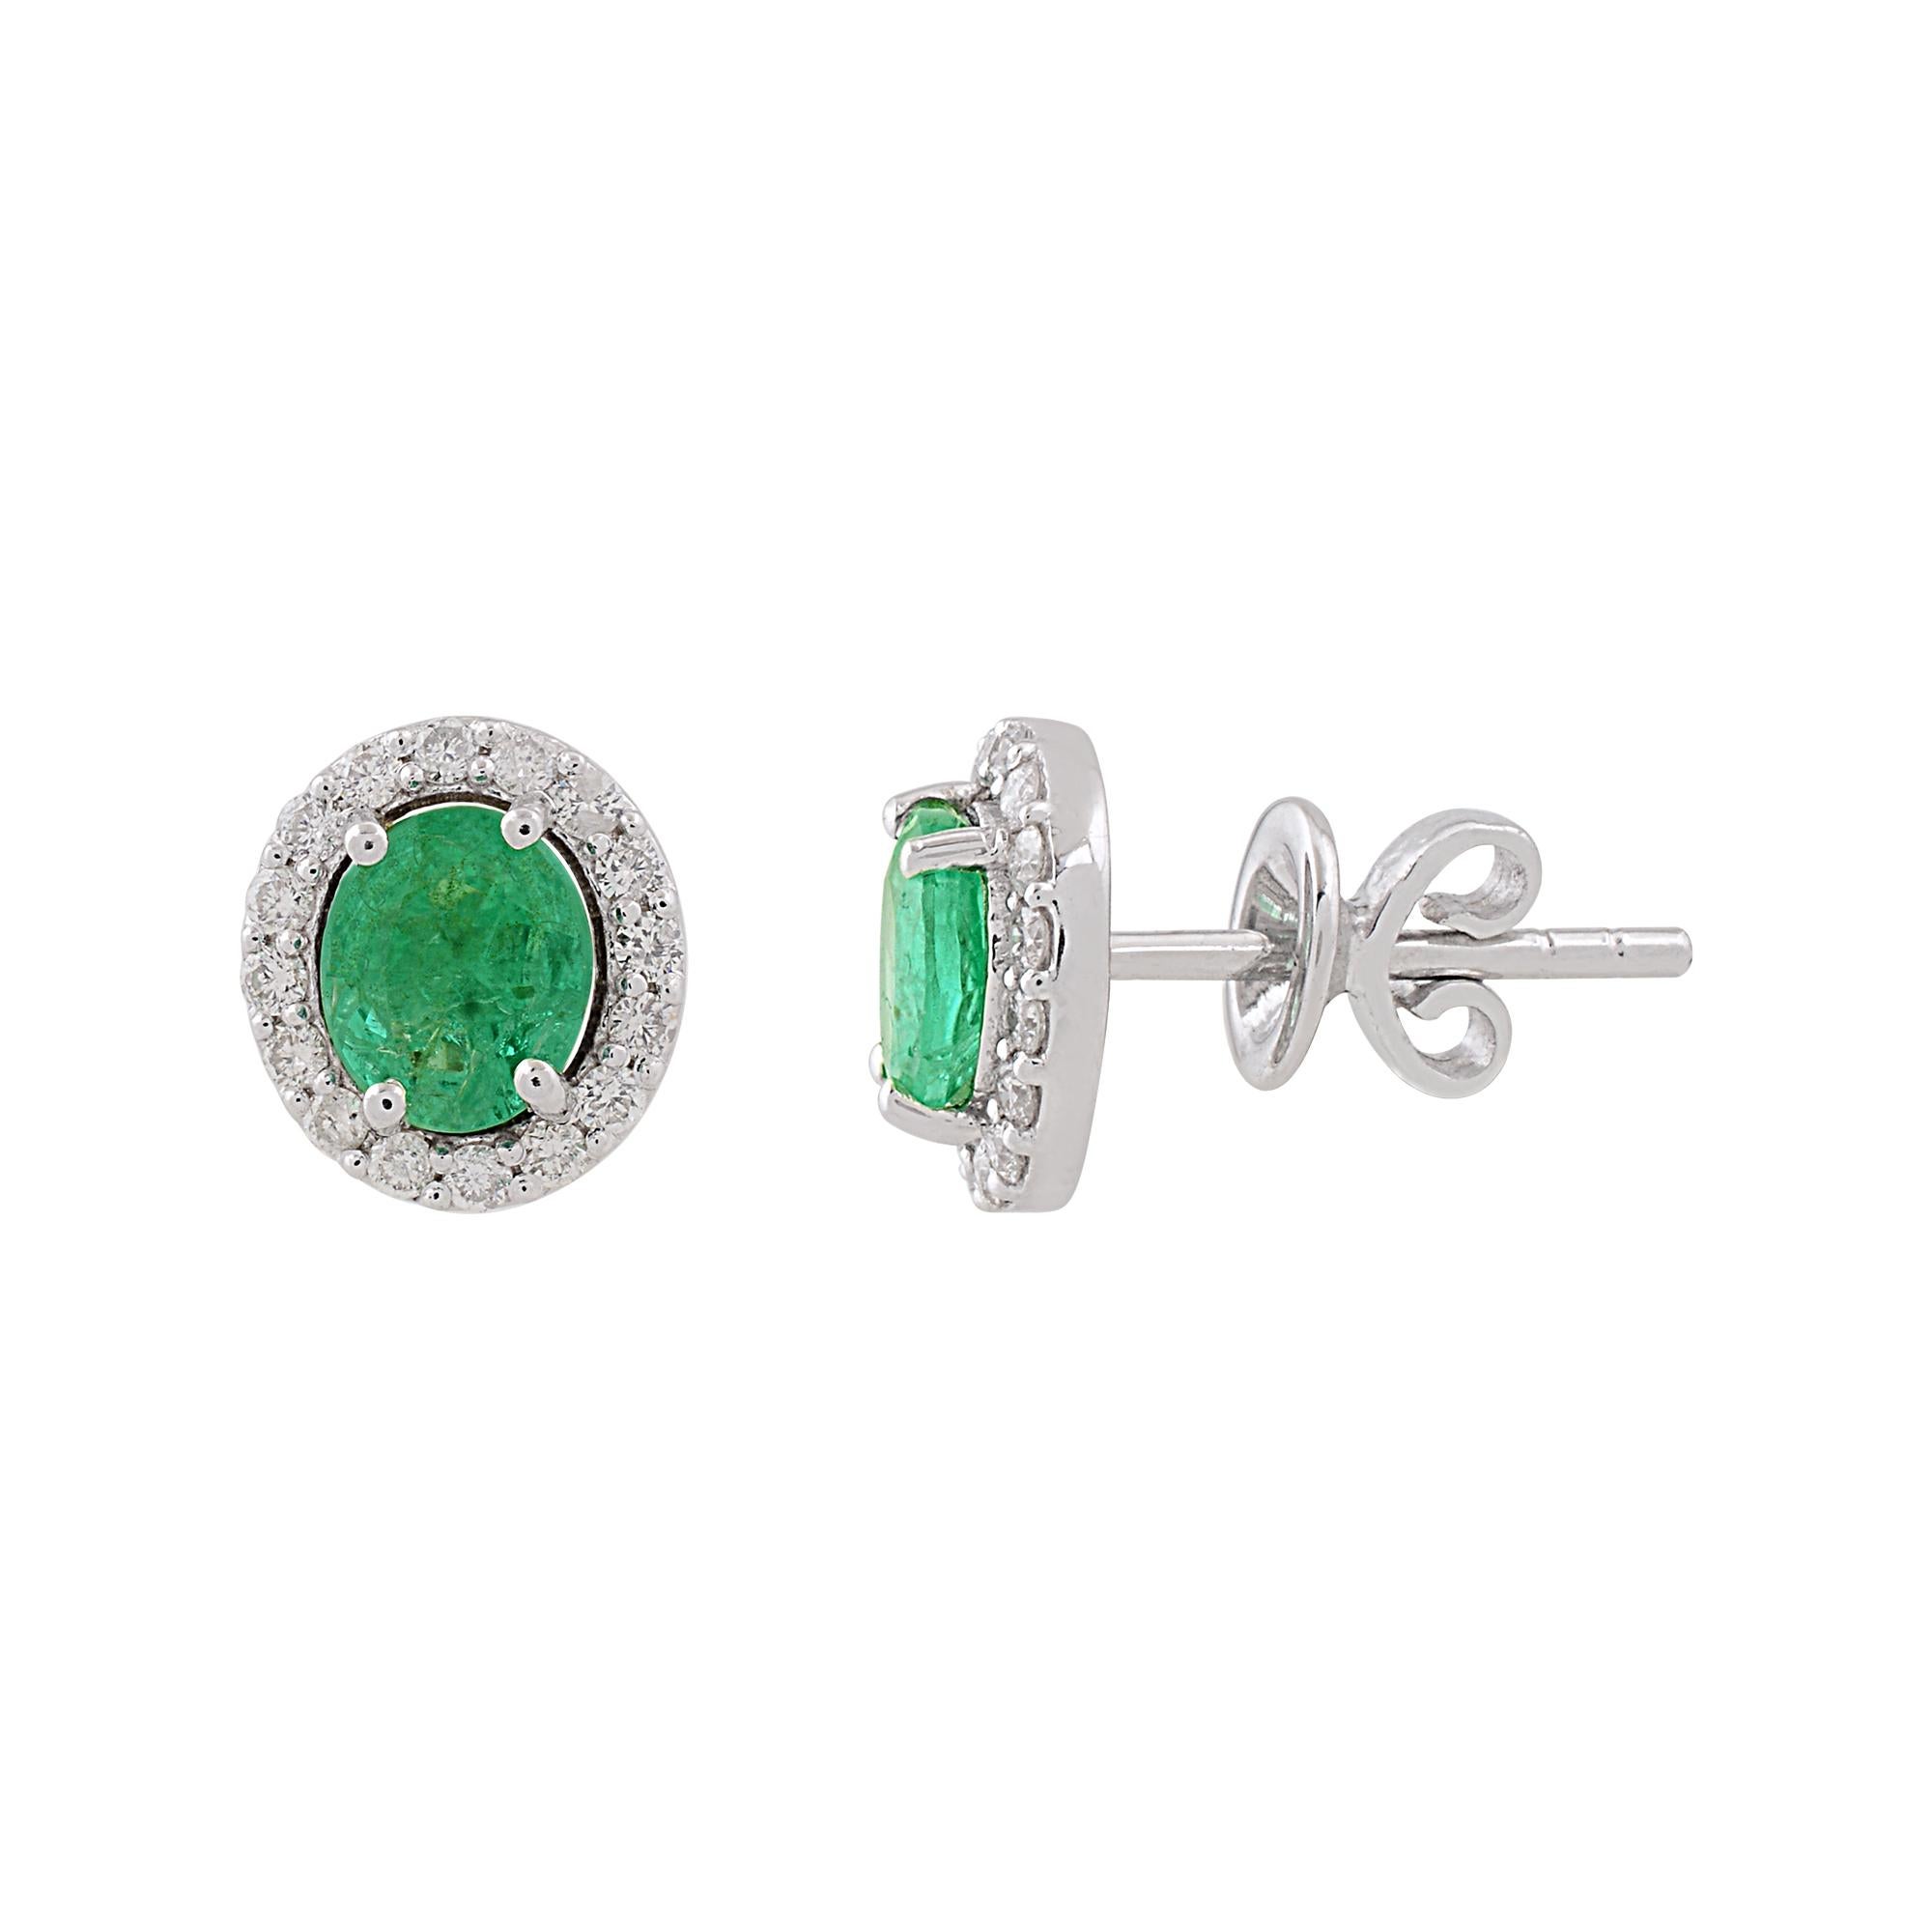 Item Code :- STE-1082B
Gross Wt. :- 2.25 gm
10k Solid White Gold Wt. :- 1.94 gm
Natural Diamond Wt. :- 0.34 Ct.  ( AVERAGE DIAMOND CLARITY SI1-SI2 & COLOR H-I )
Emerald Wt. :- 1.22 Ct.
Earrings Size :- 11 mm approx.

✦